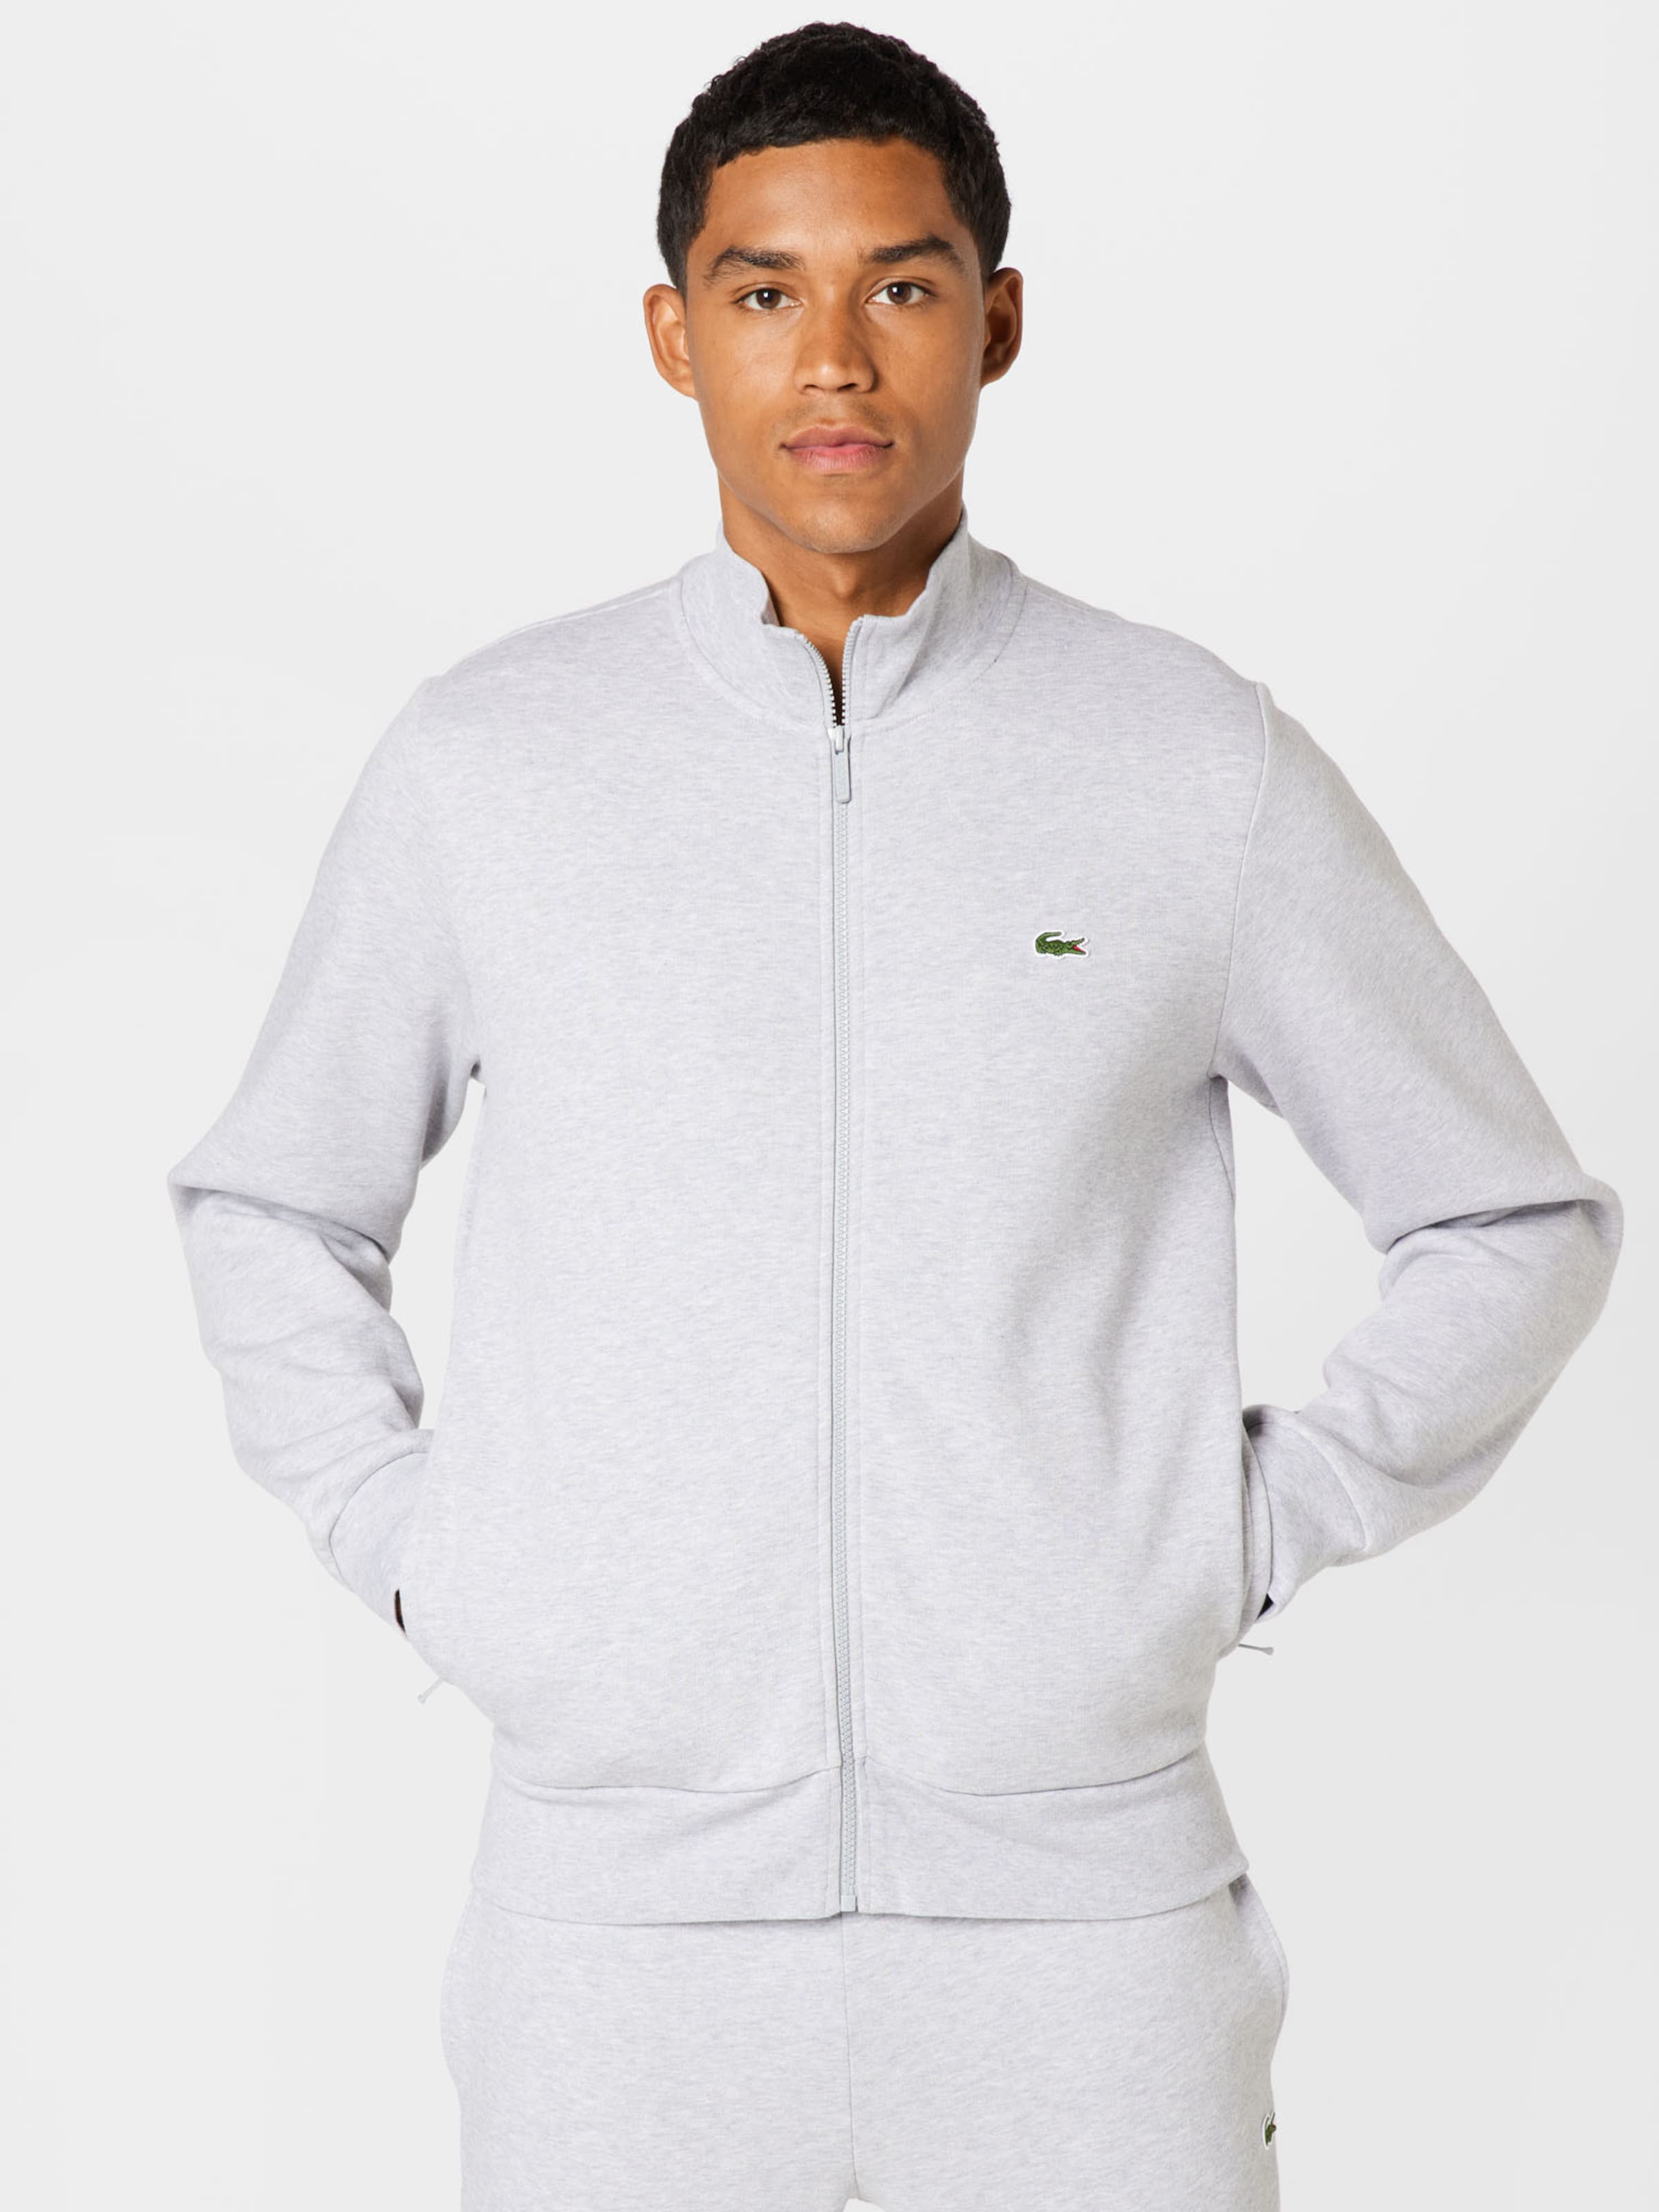 LACOSTE i | YOU